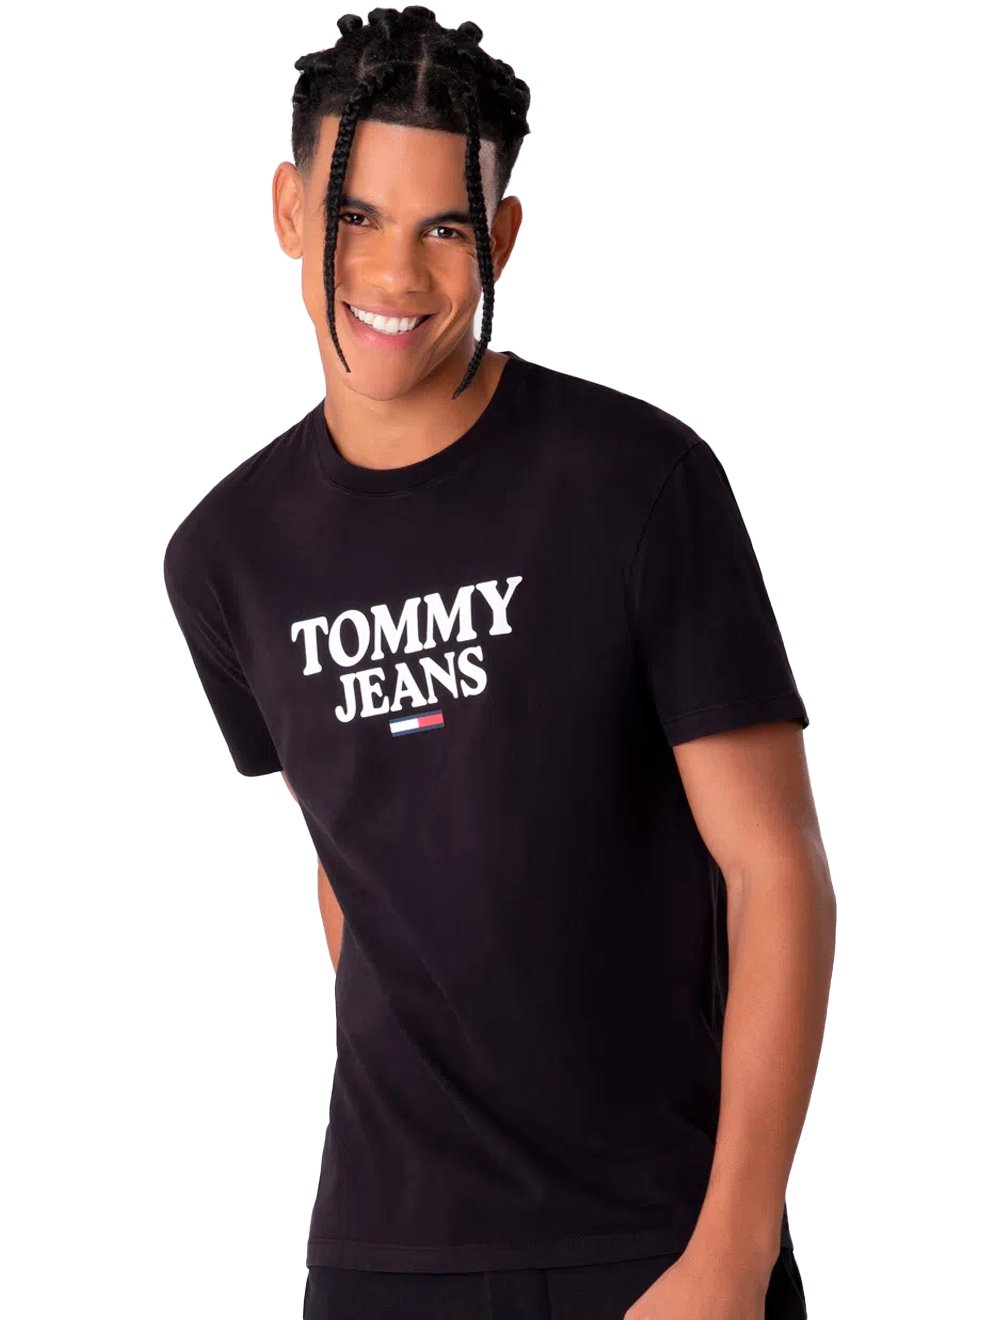 Camiseta Tommy Jeans Masculina Center Entry Graphic Preta